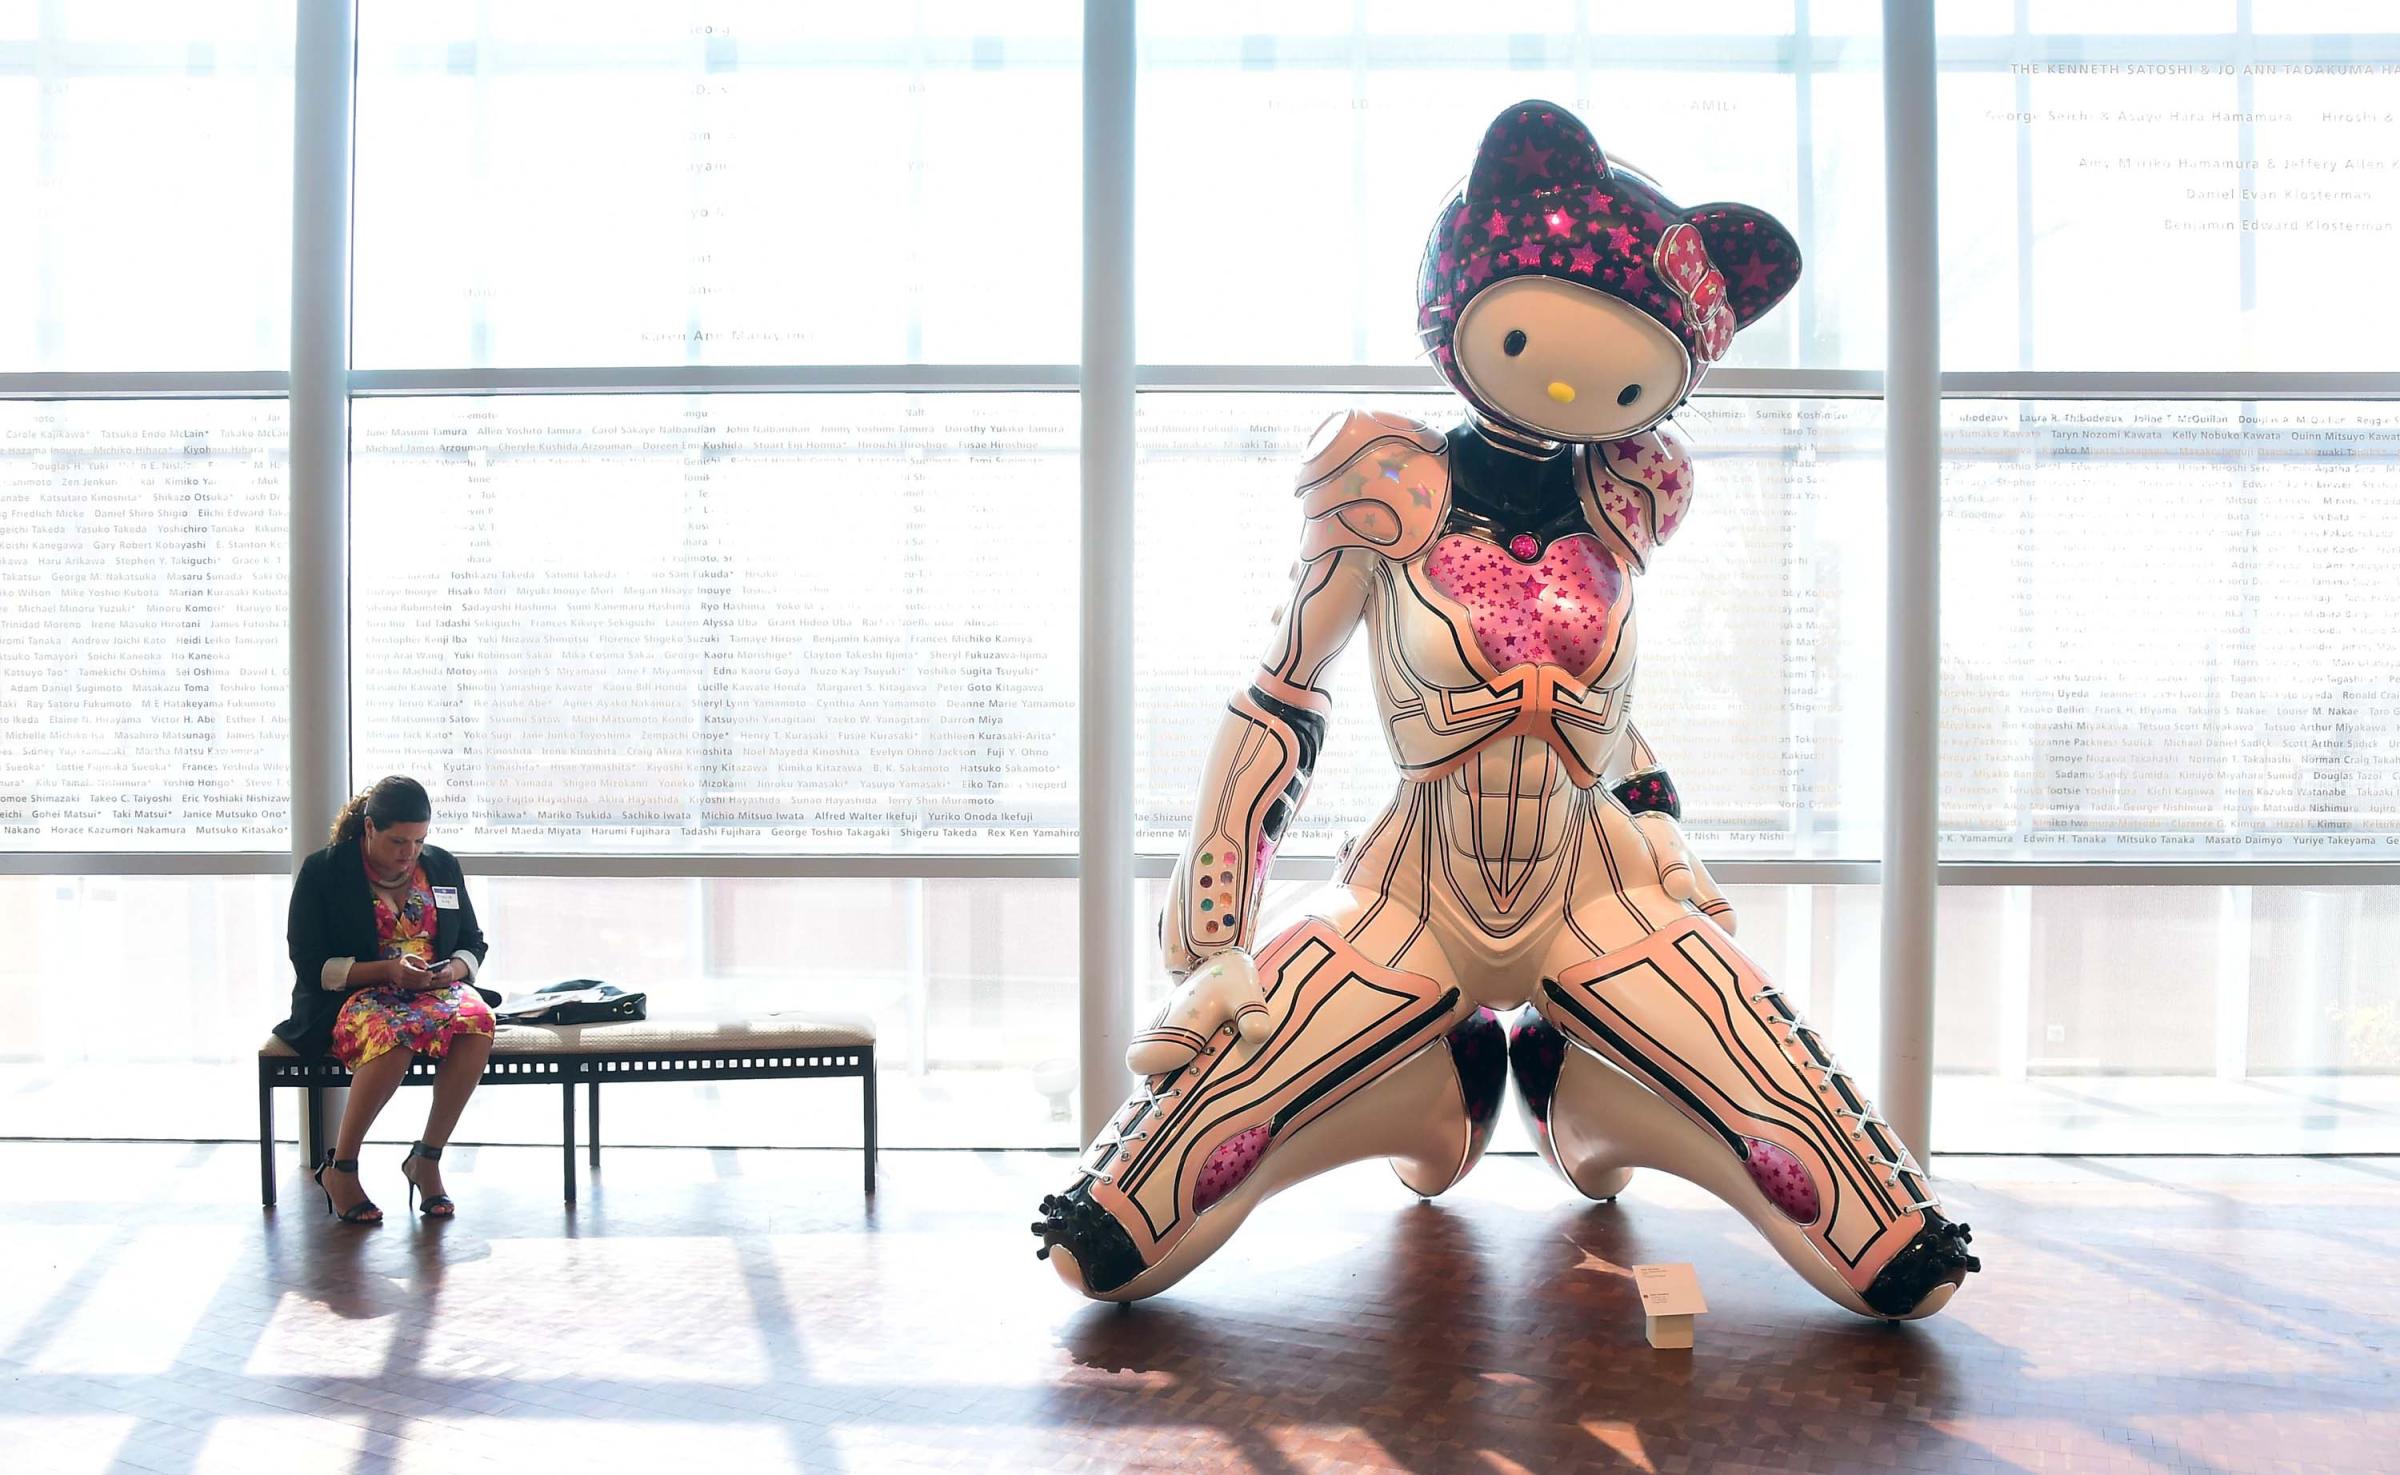 A woman is seated beside a display of "Super Space Titan Kitty", a 2014 fiberglass sculpture by Colin Christian displayed at a press event ahead of the opening of the first ever Hello Kitty exhibition in North America at the Japanese American National Museum in Los Angeles on Oct. 10, 2014.